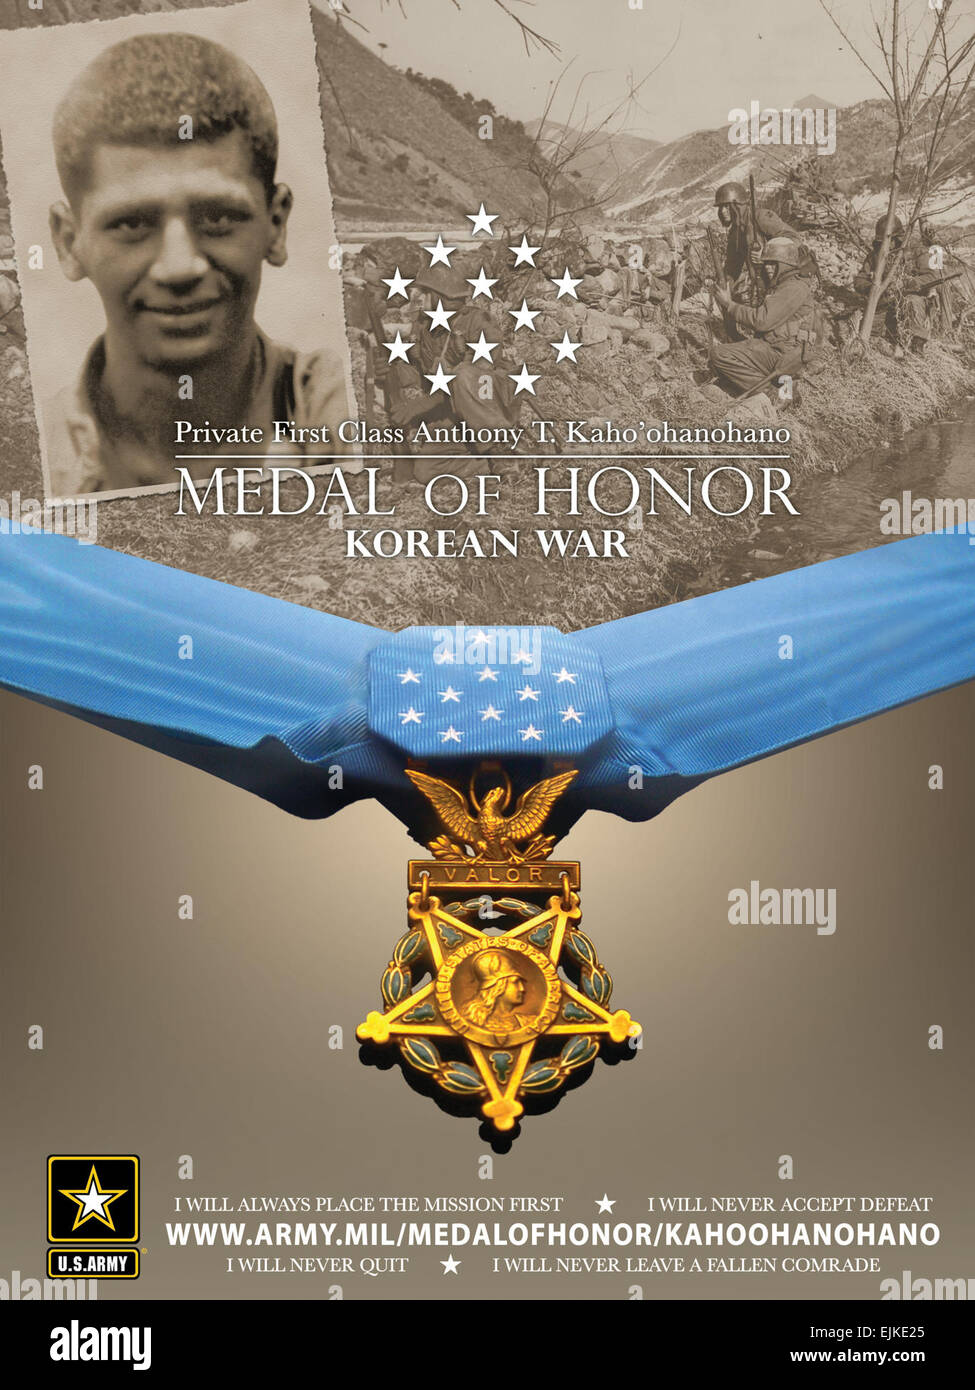 Two Soldiers who died as a result of their gallant and intrepid actions during the Korean War will be posthumously awarded the Medal Honor during a ceremony, today, at the White House. The families of Pfc. Anthony T. Kaho'ohanohano and Pfc. Henry Svehla received the medals from President Barack Obama on behalf of the two Soldiers. /-news/2011/04/29/55695-2-korean-war-heroes-t...  /-news/2011/04/29/55695-2-korean-war-heroes-to-be-posthumously-awarded-medal-of-honor-today/index.html?ref=home-headline-title1 Stock Photo